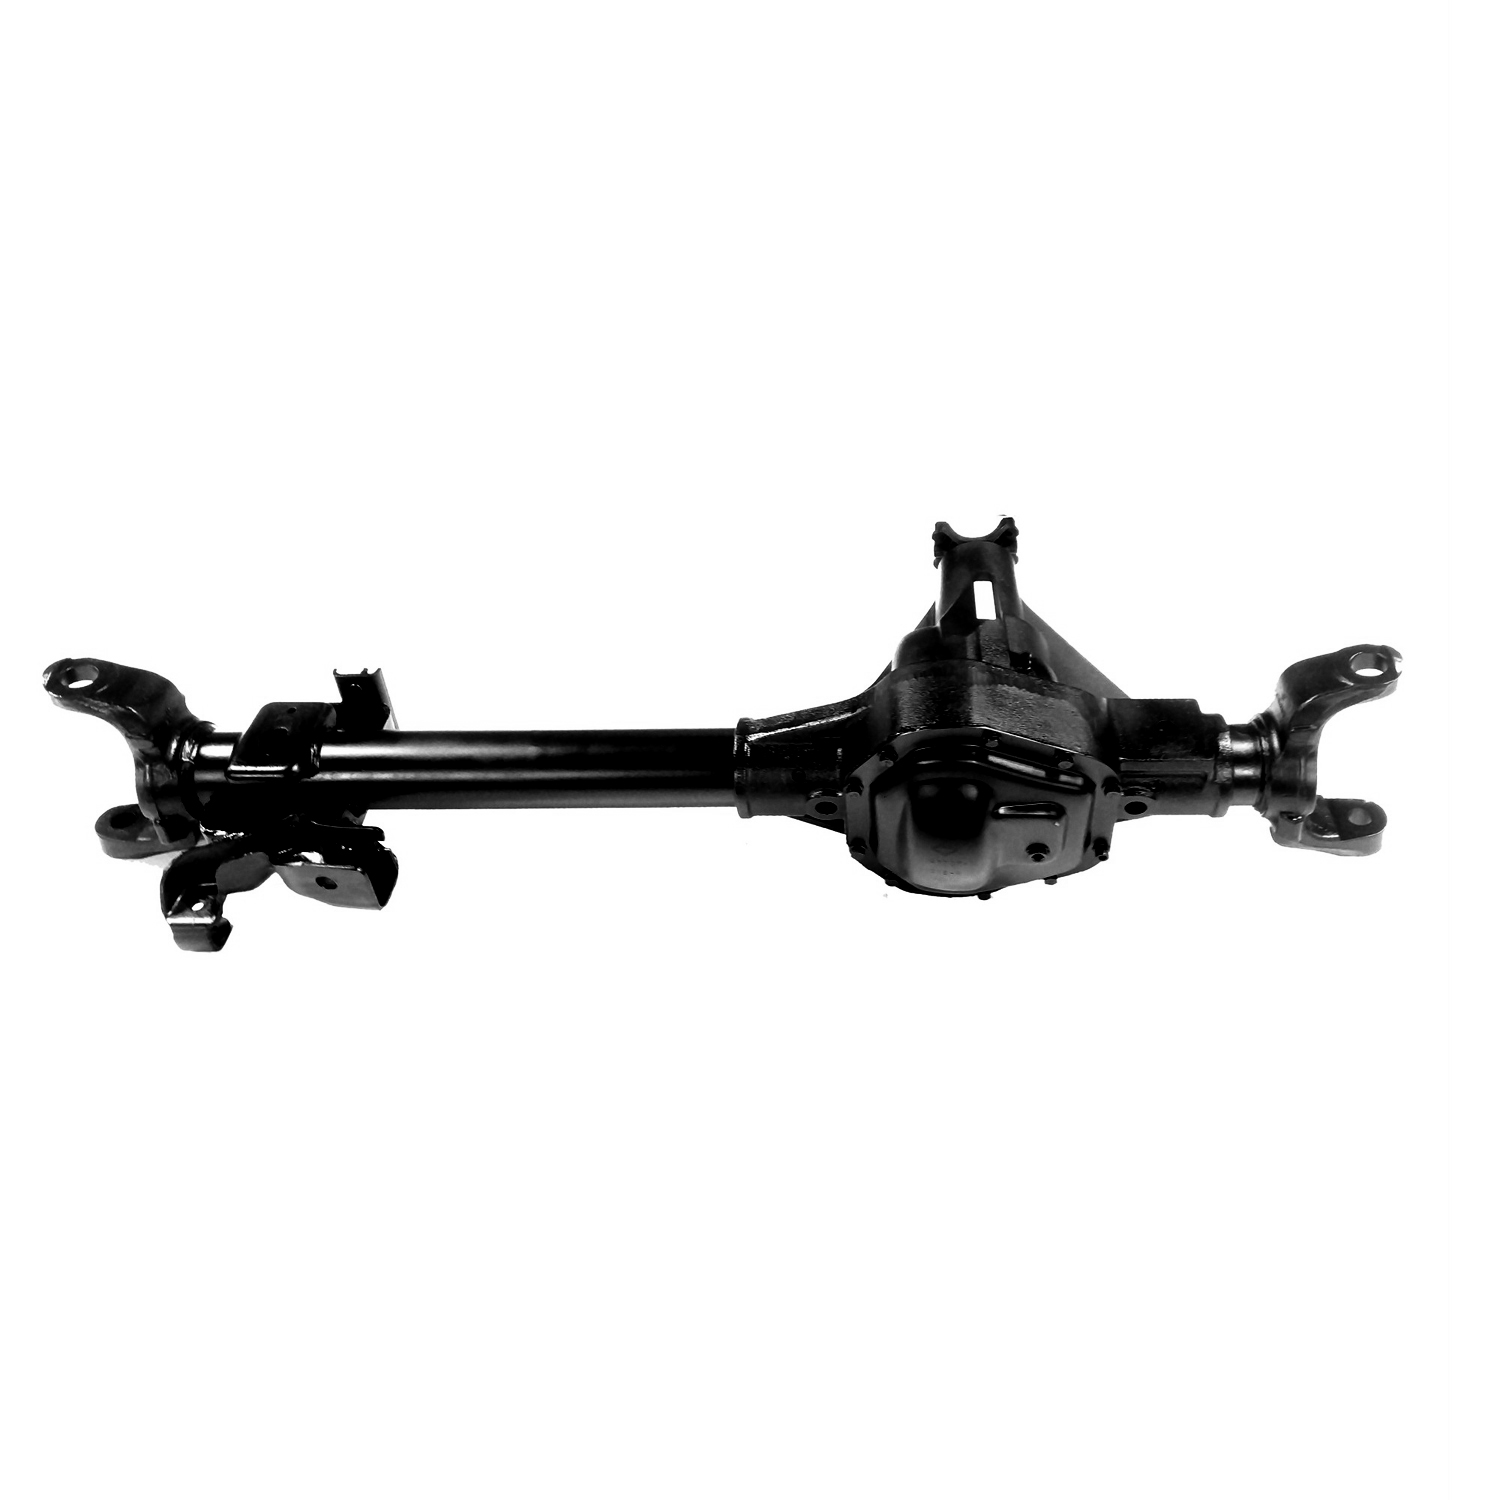 Reman Axle Assembly for Dana 60 1999 Ford F350 3.73 Ratio, DRW